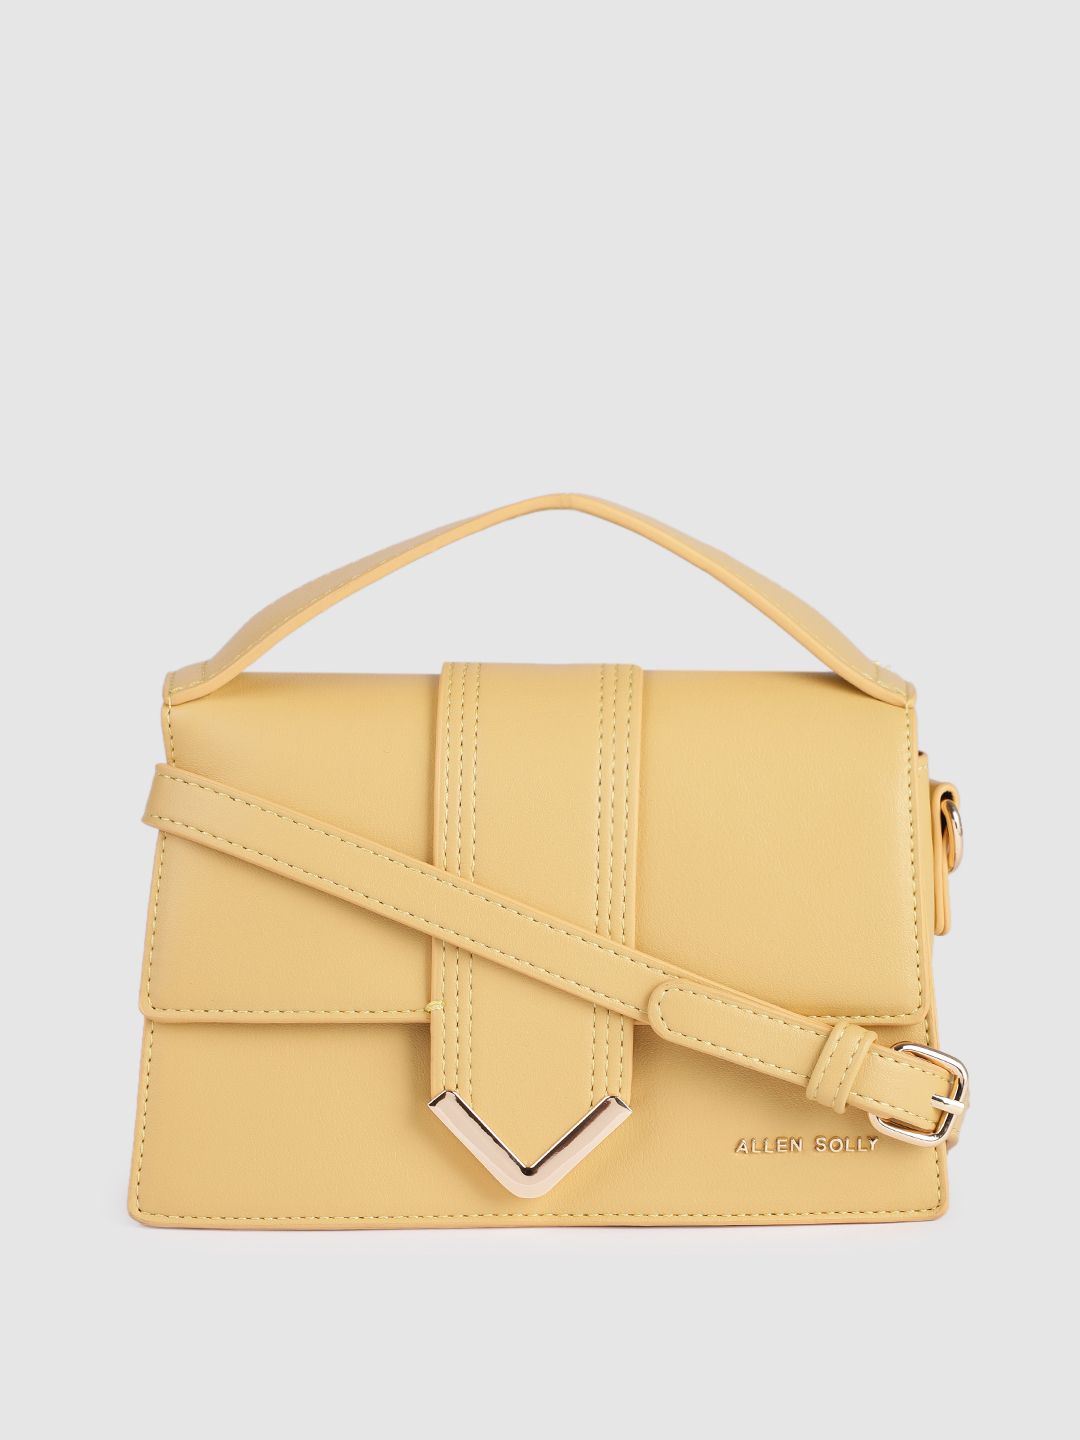 Allen Solly Mustard PU Structured Sling Bag Price in India